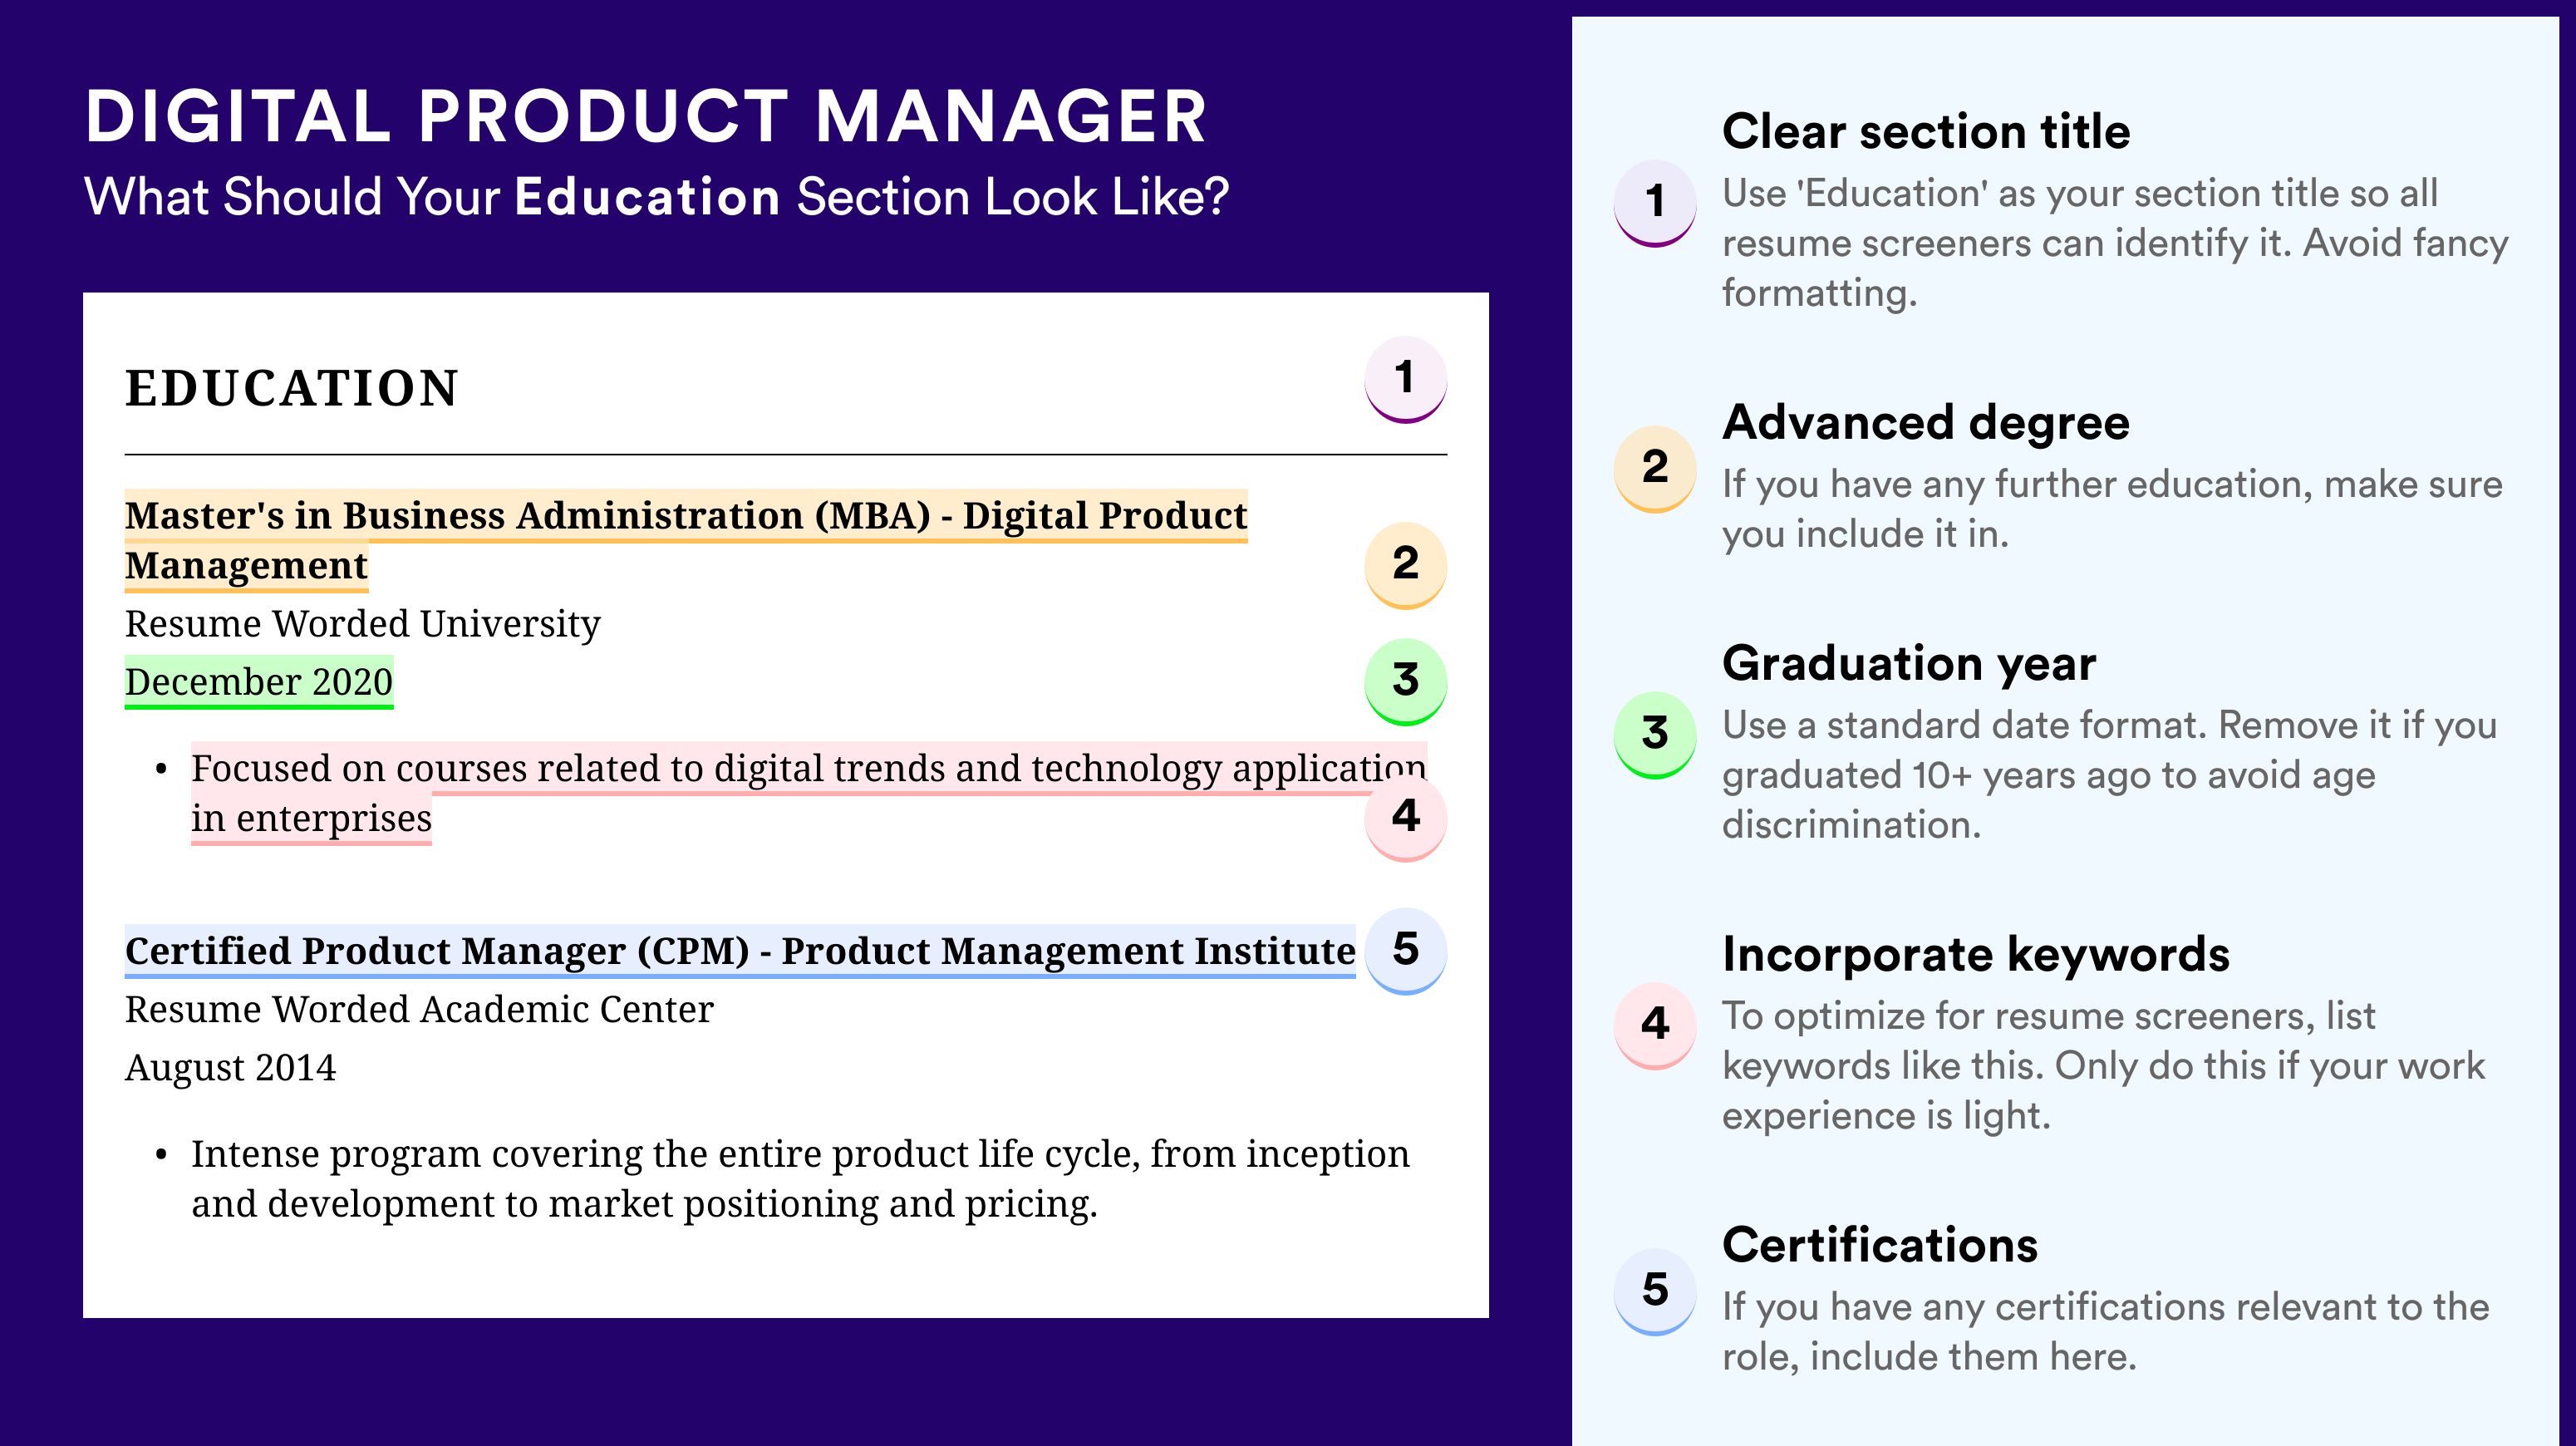 How To Write An Education Section - Digital Product Manager Roles